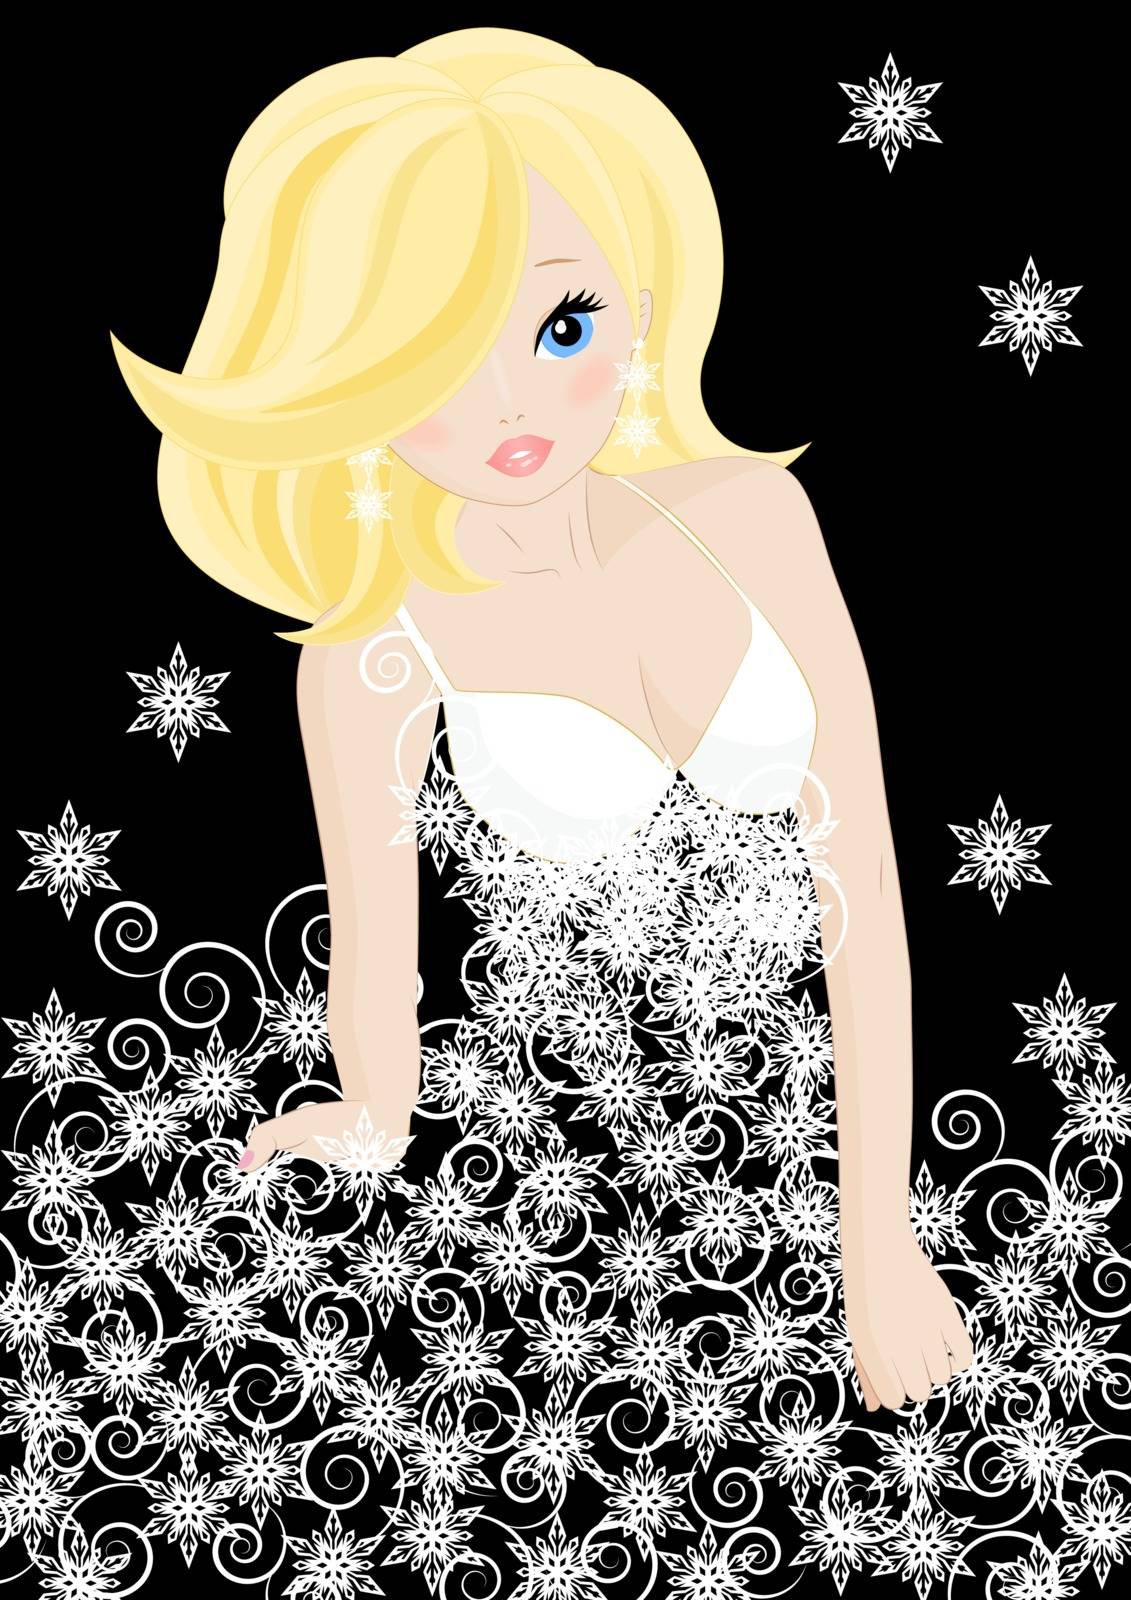 girl snow Queen in a dress made of snowflakes on black background